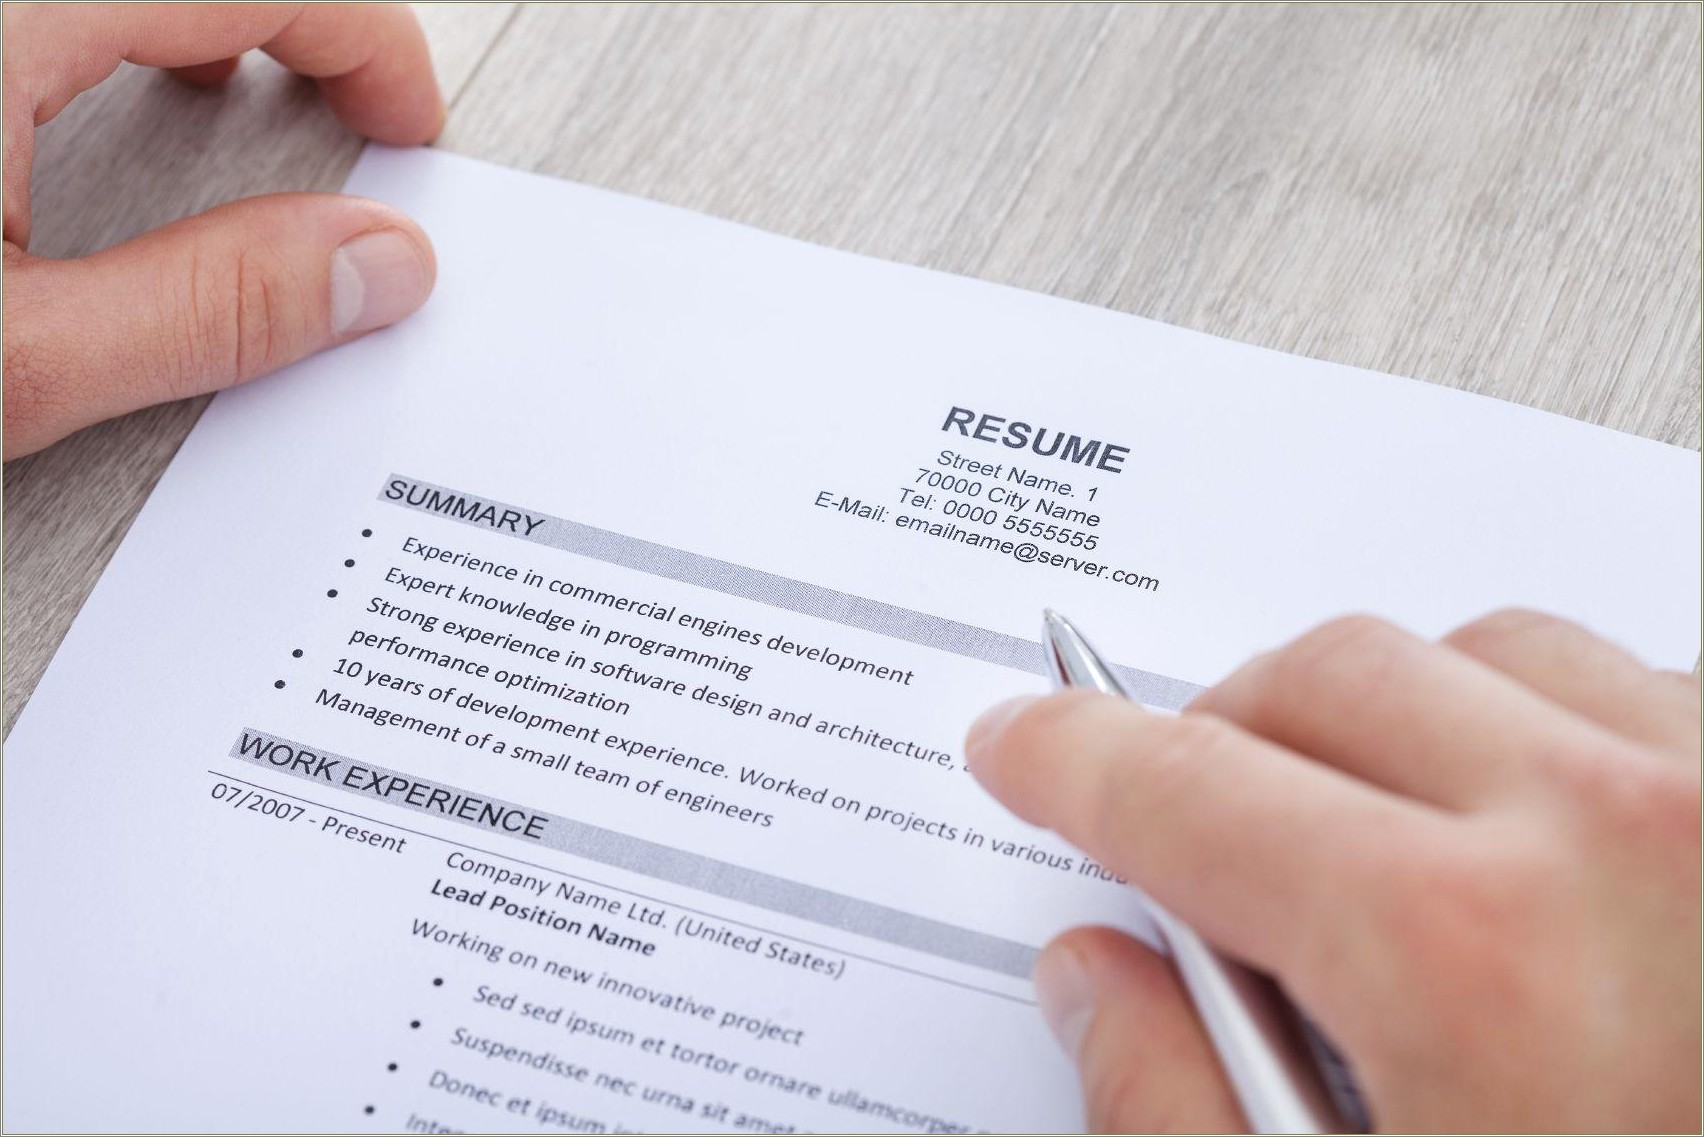 Best Companies That Look Good On A Resume